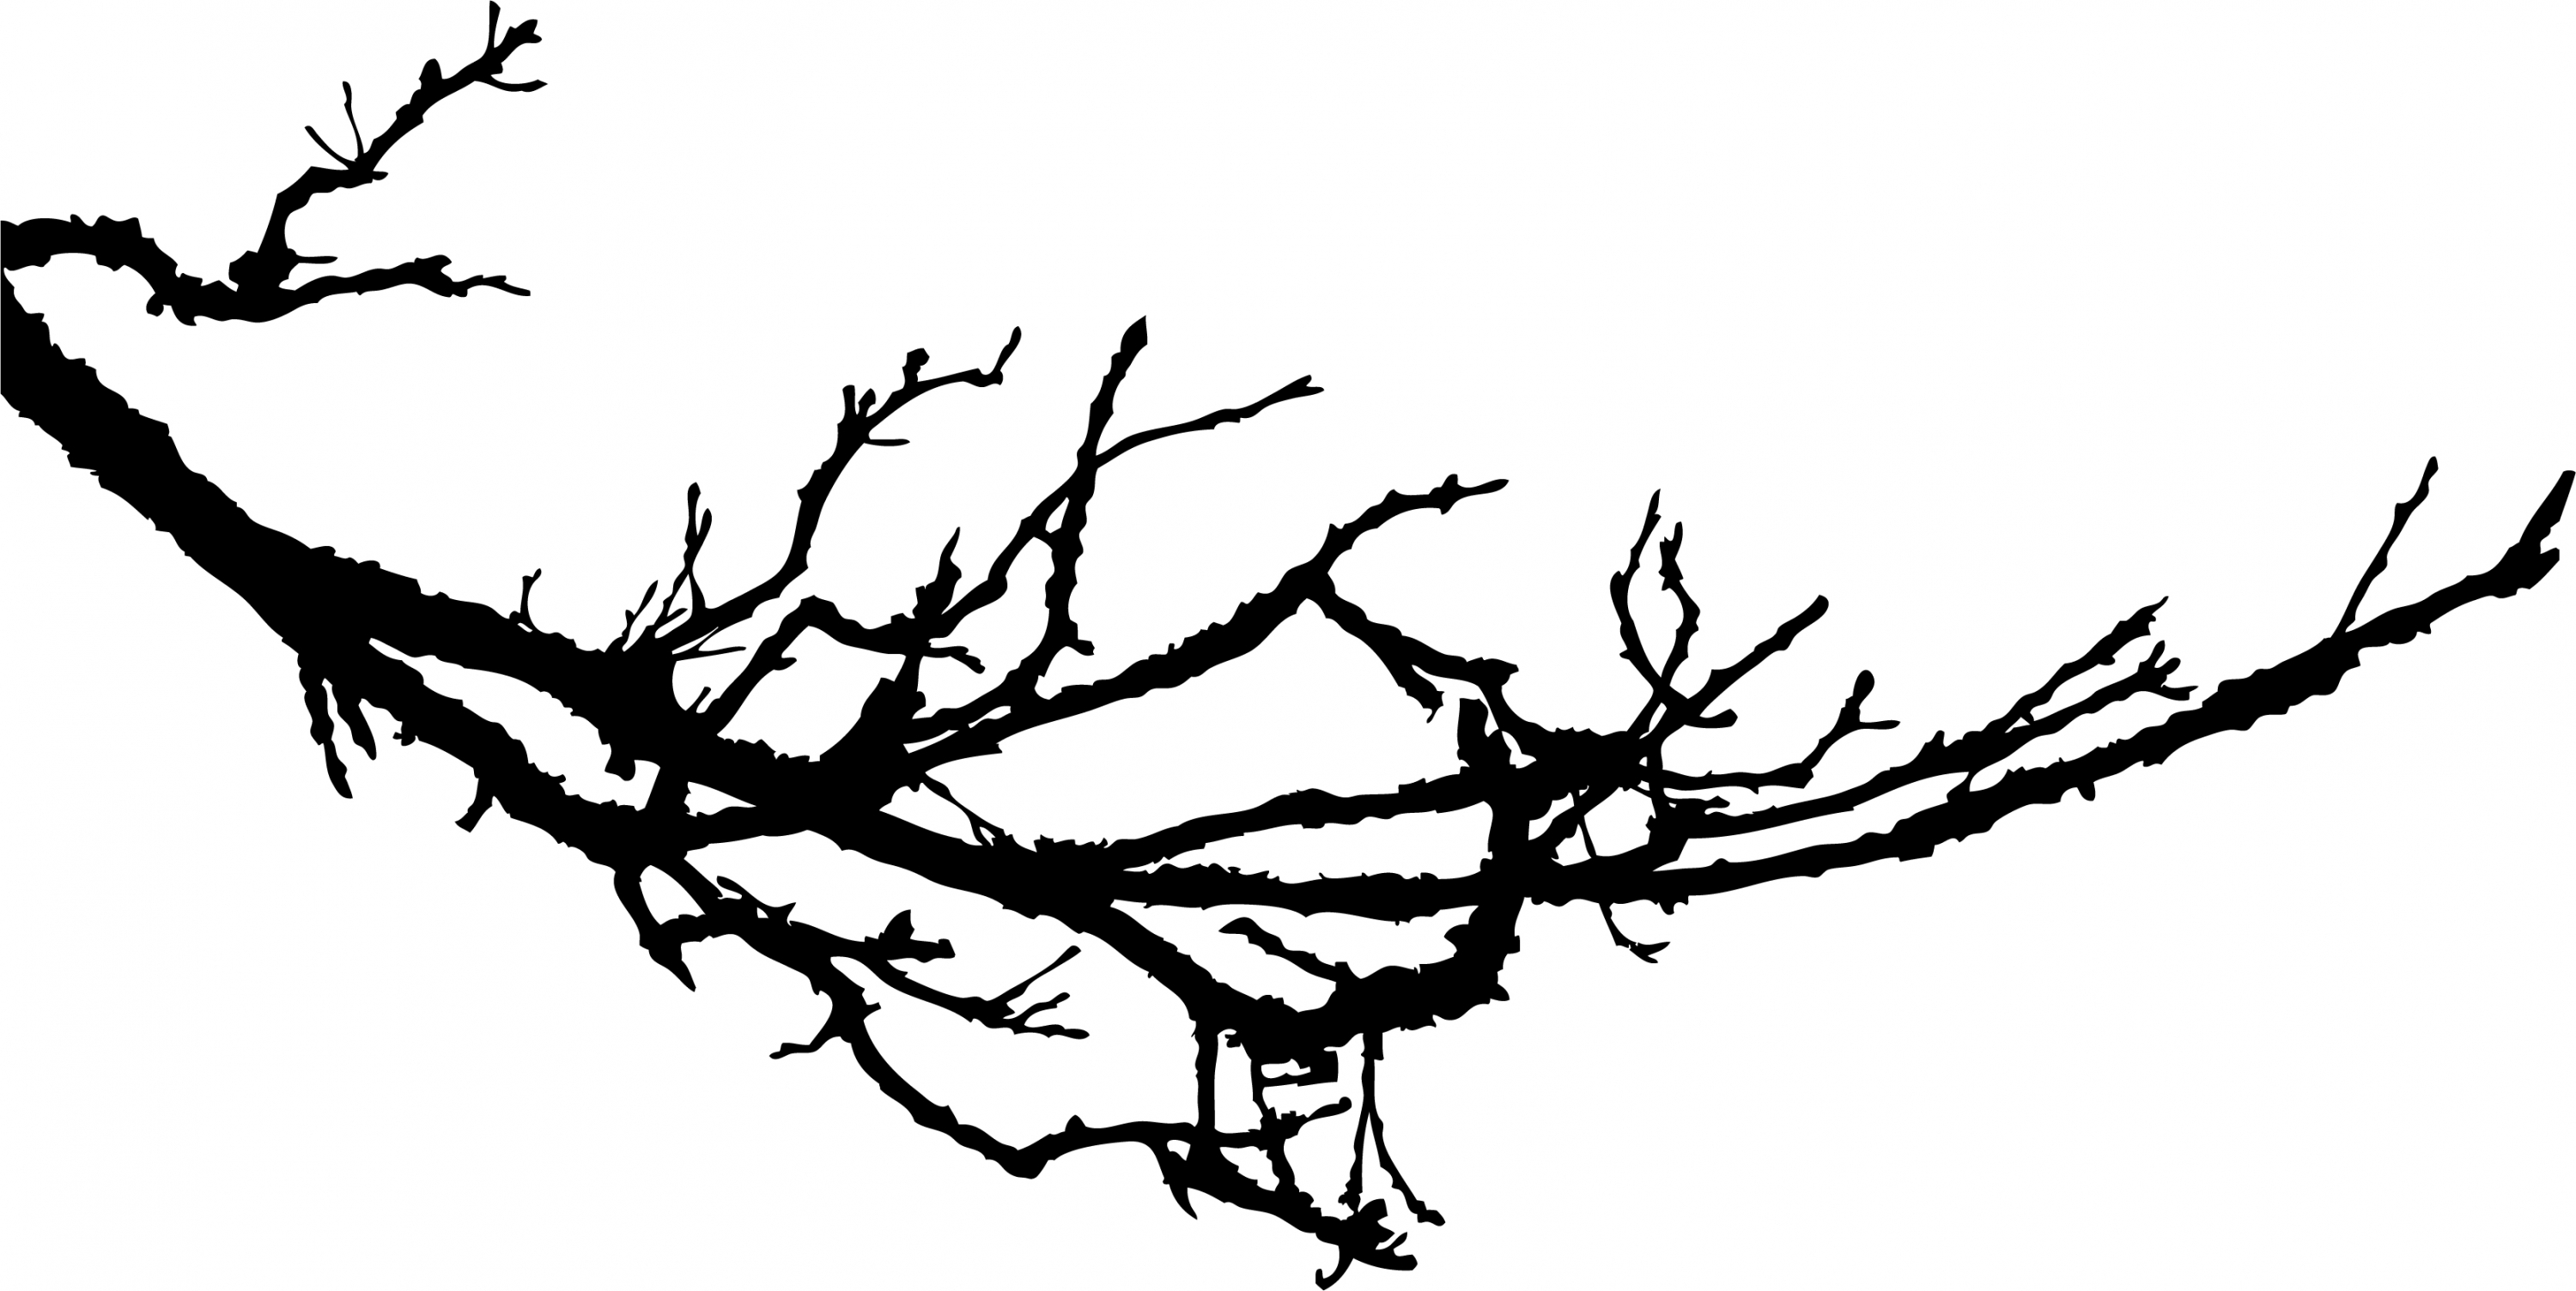 Gnarly Branch Silhouette Wall Sticker Large Tree Sticker Wall ...